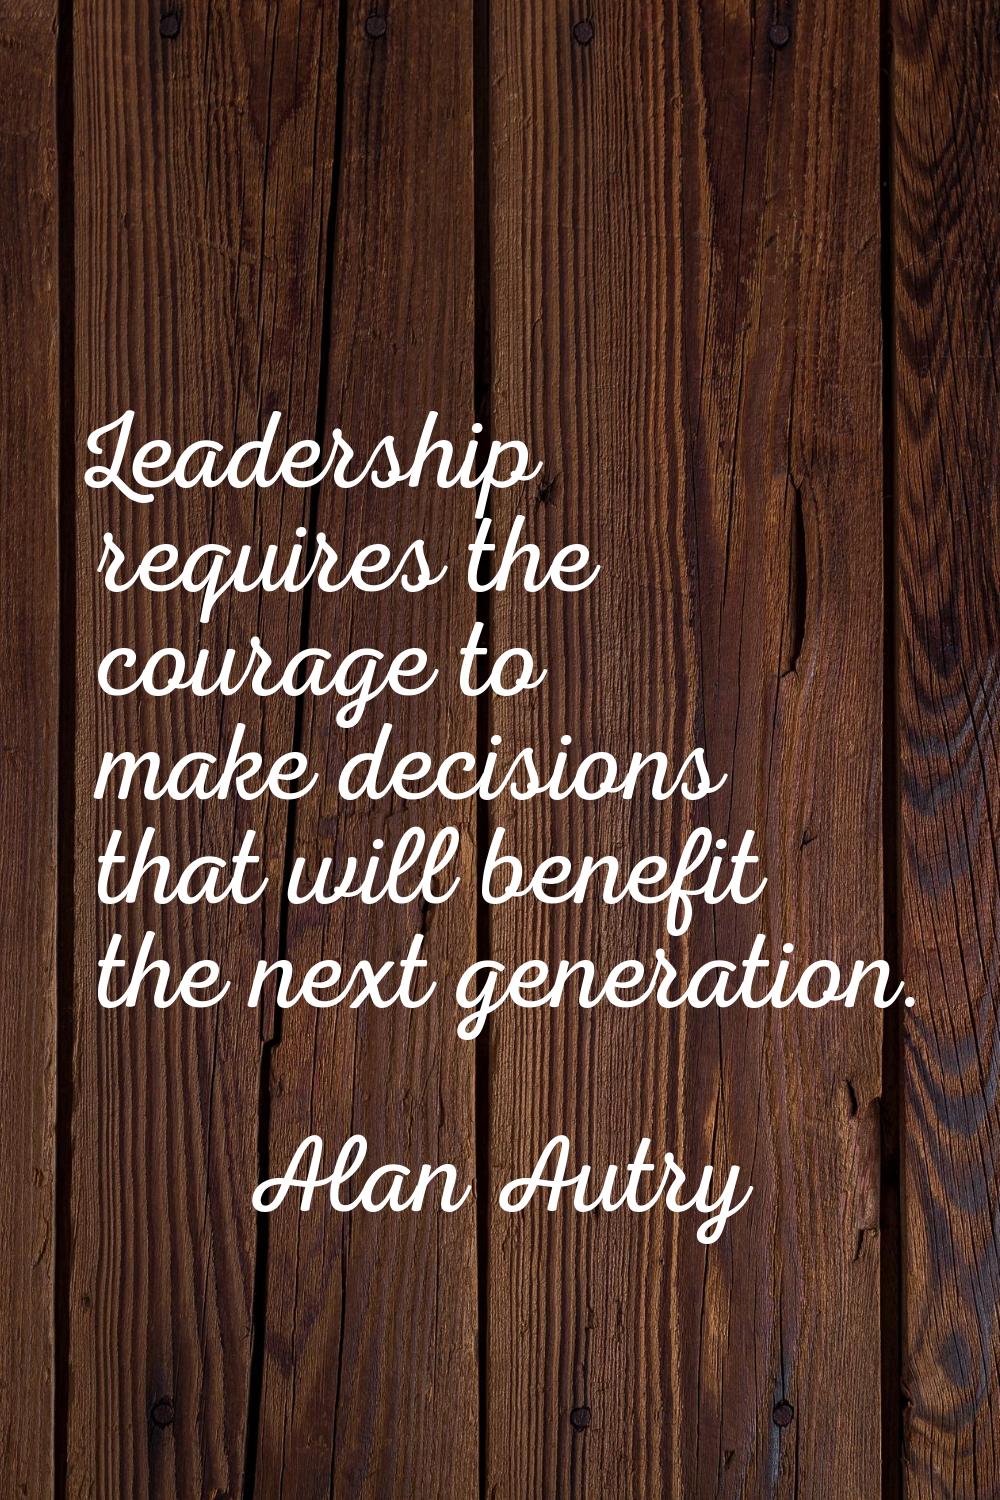 Leadership requires the courage to make decisions that will benefit the next generation.